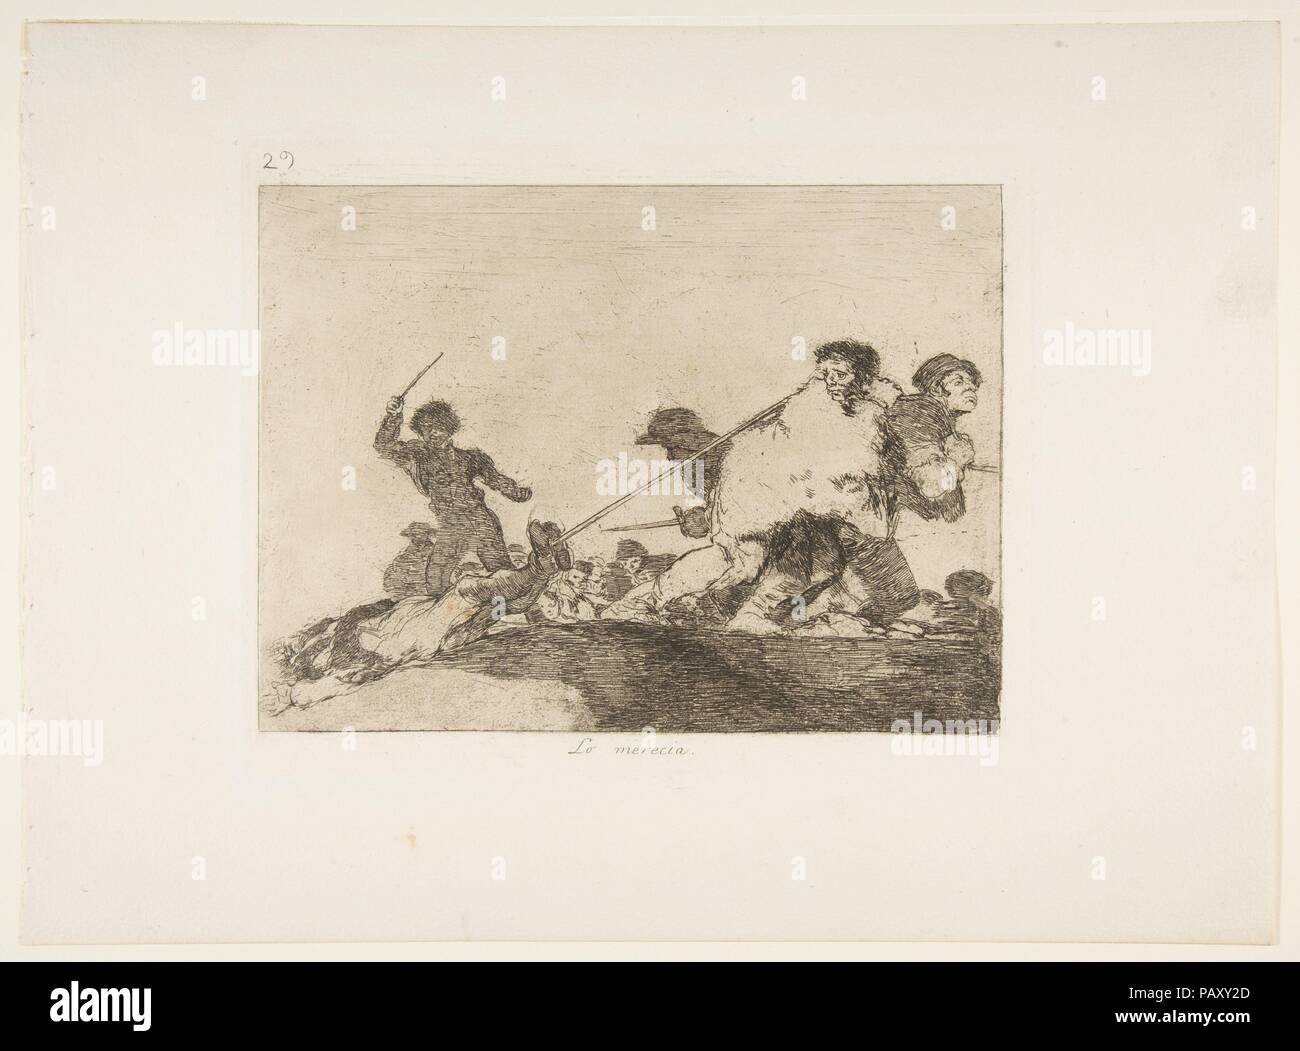 Plate 29 from 'The Disasters of War' (Los Desastres de la Guerra):: 'He deserved it.' (Lo merecia.). Artist: Goya (Francisco de Goya y Lucientes) (Spanish, Fuendetodos 1746-1828 Bordeaux). Dimensions: Plate: 6 7/8 × 8 1/2 in. (17.4 × 21.6 cm)  Sheet: 13 7/16 x 9 7/8 in. (34.2 x 25.1 cm). Series/Portfolio: The Disasters of War. Date: 1810 ( published 1863). Museum: Metropolitan Museum of Art, New York, USA. Stock Photo